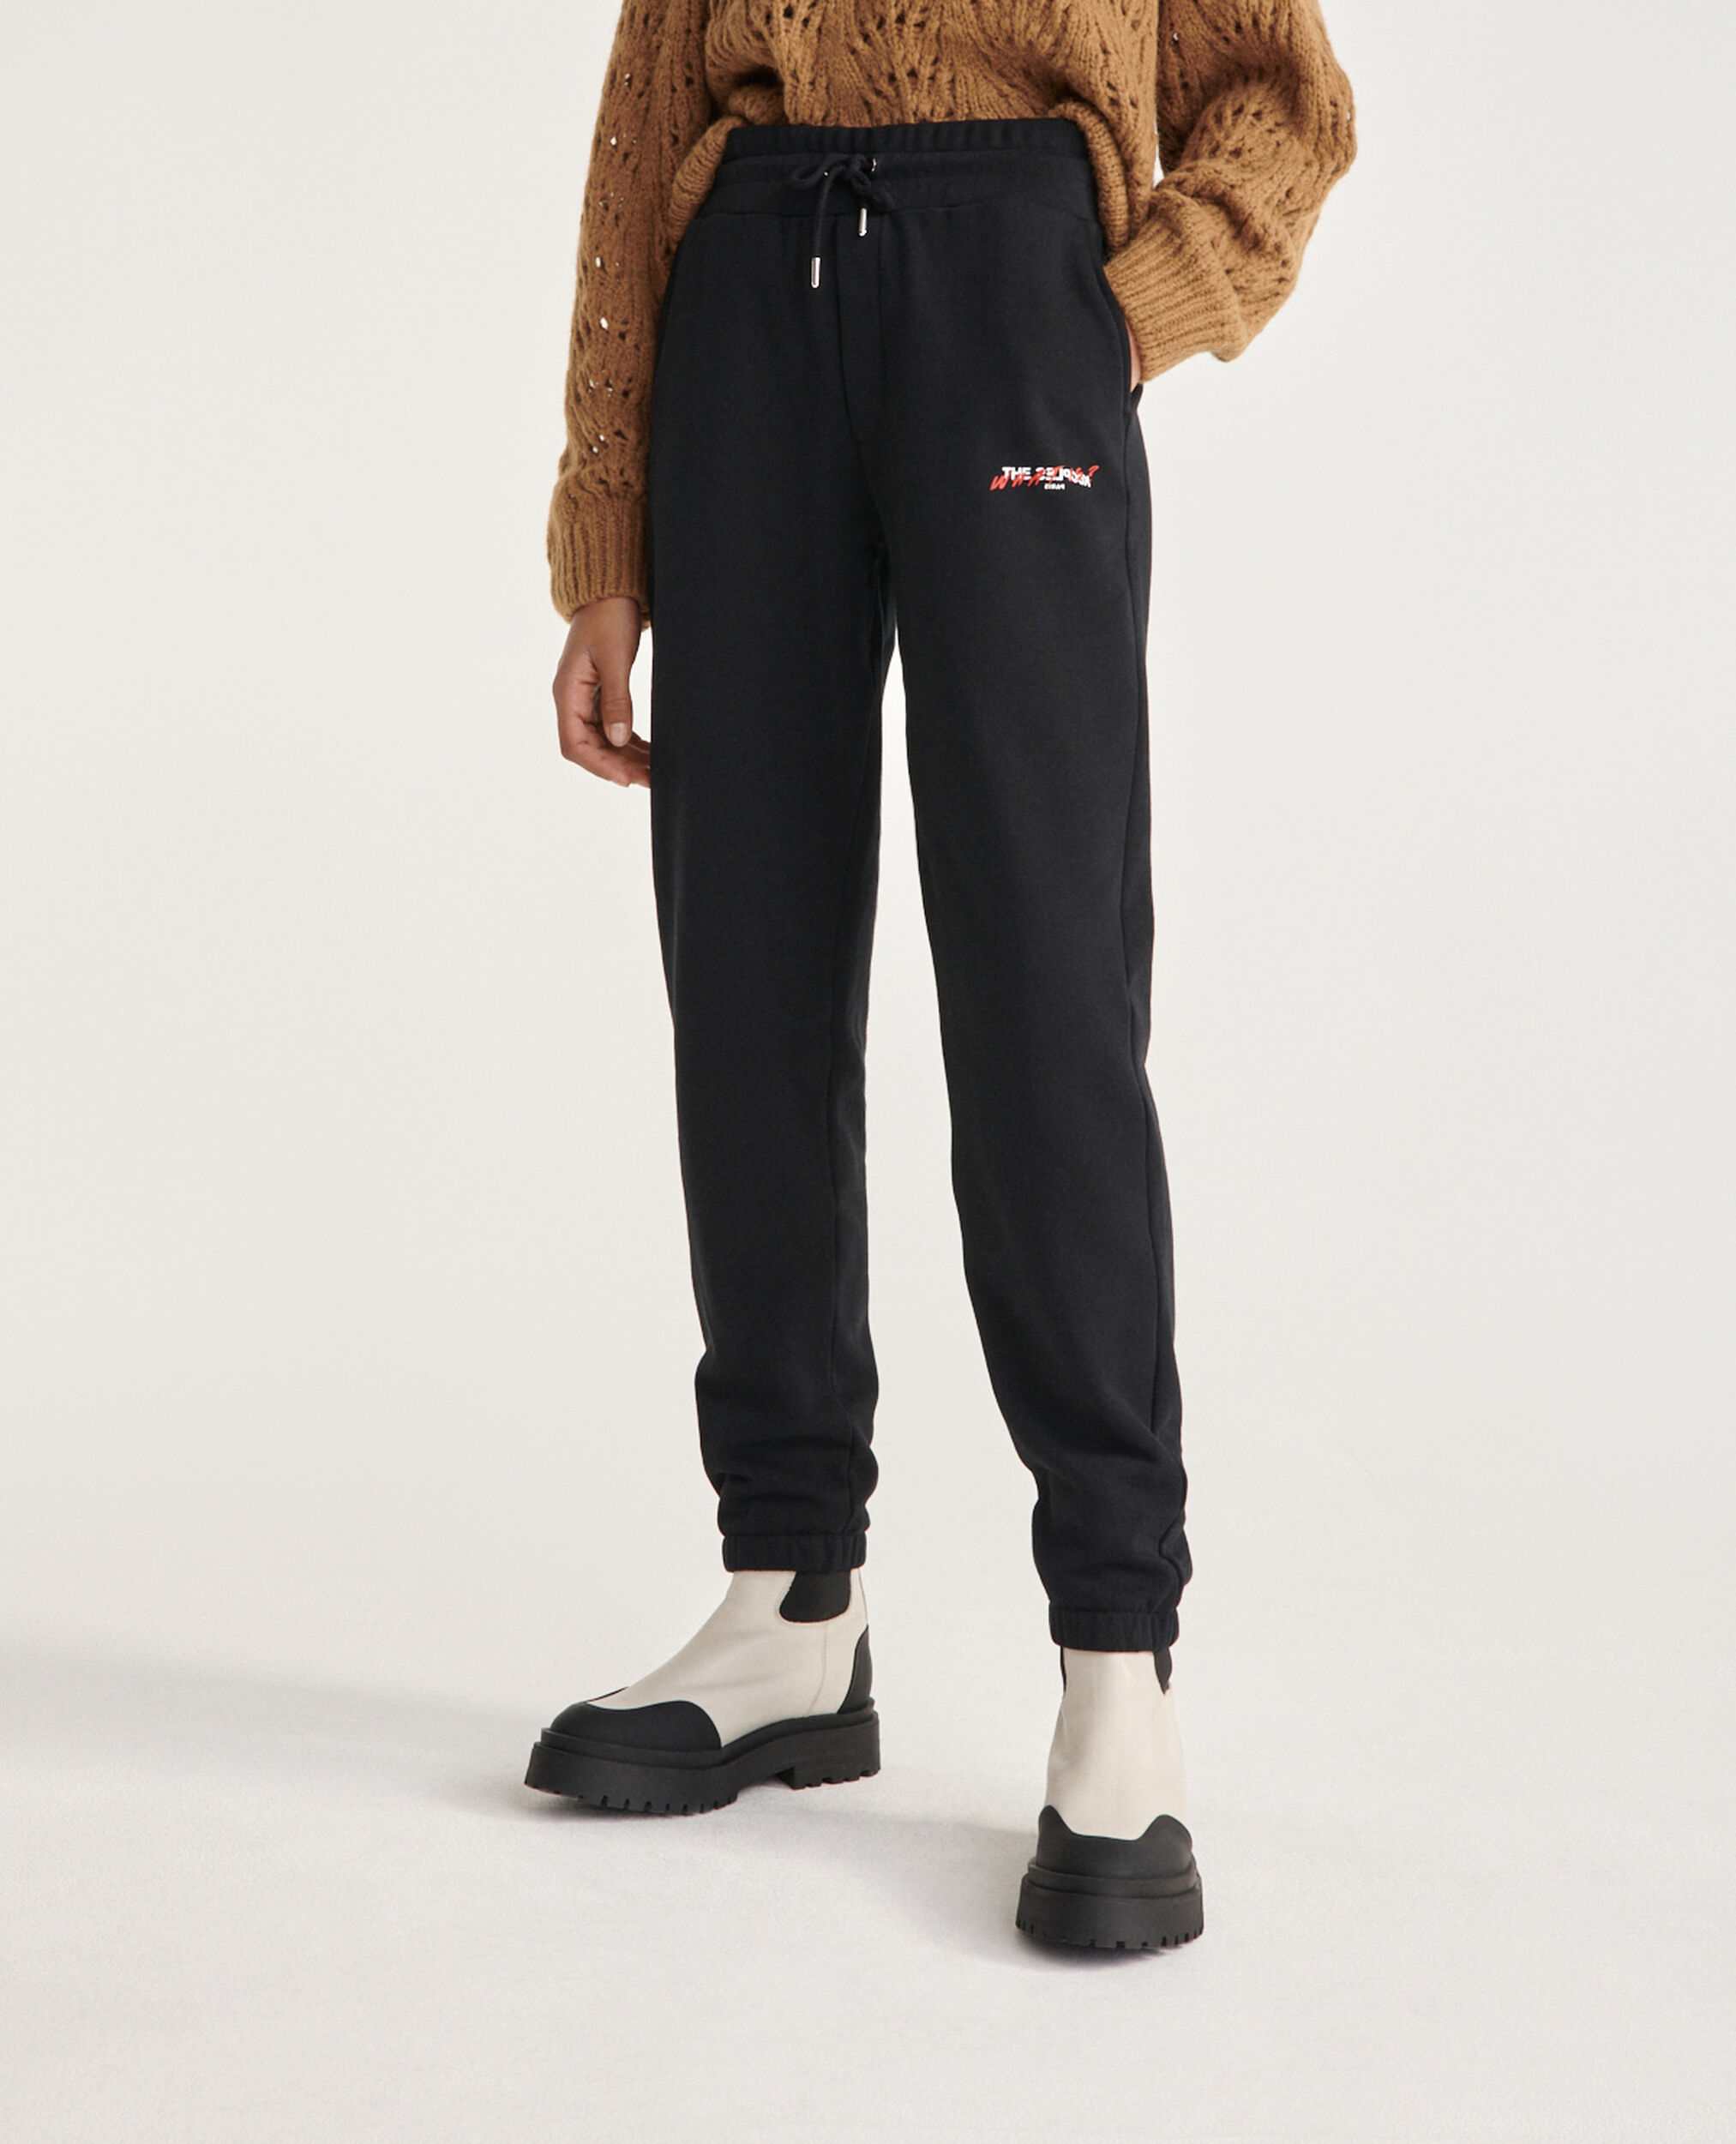 Black joggers with small The Kooples logo, BLACK, hi-res image number null